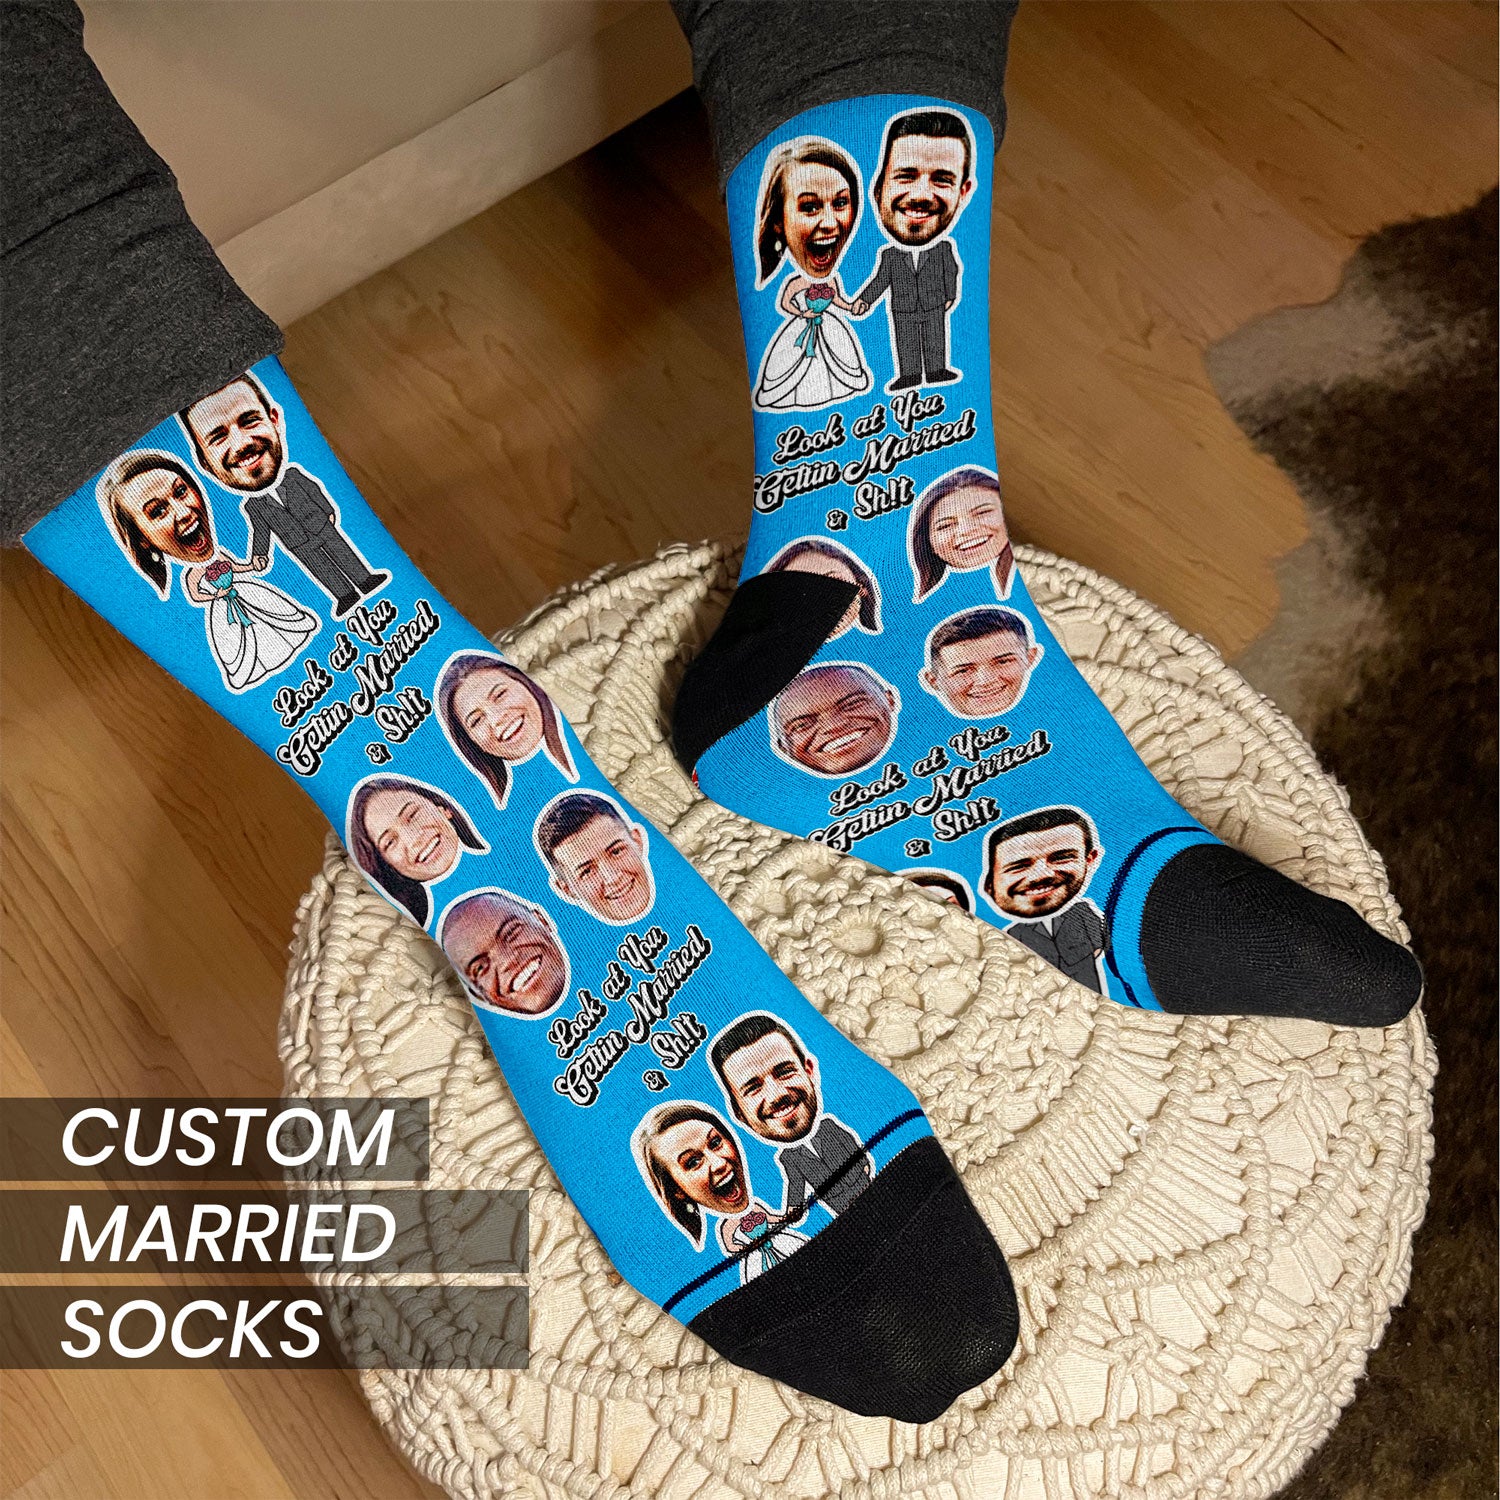 personalized wedding gift socks with couple and friends on light blue socks